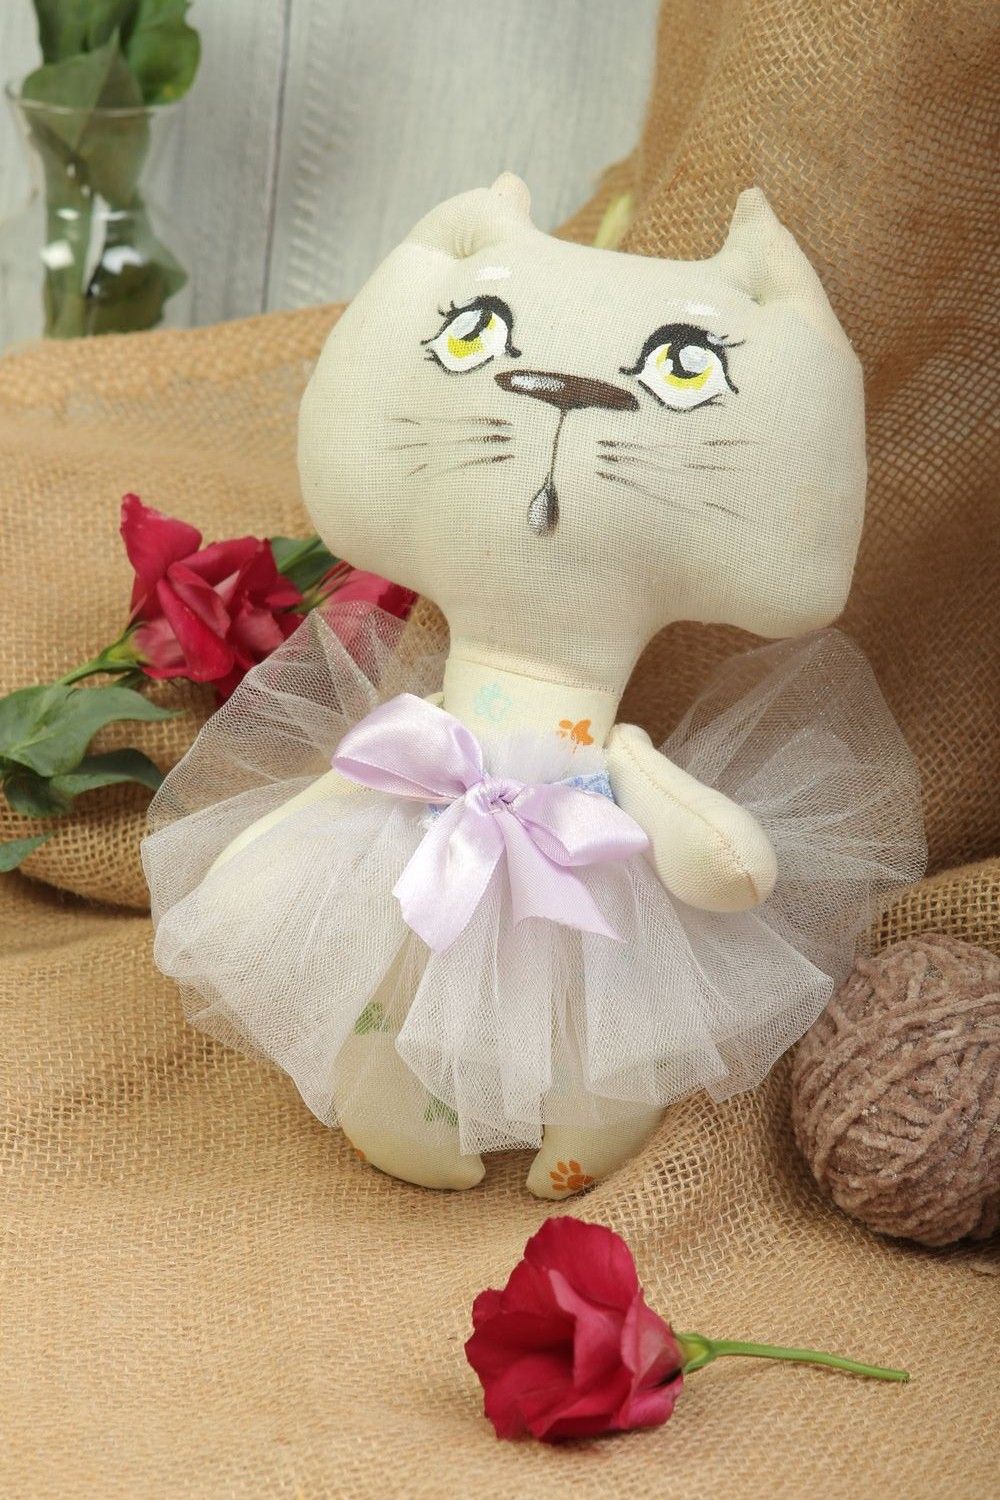 Unusual handmade soft toy cute toys cool bedrooms gift ideas decorative use only photo 1